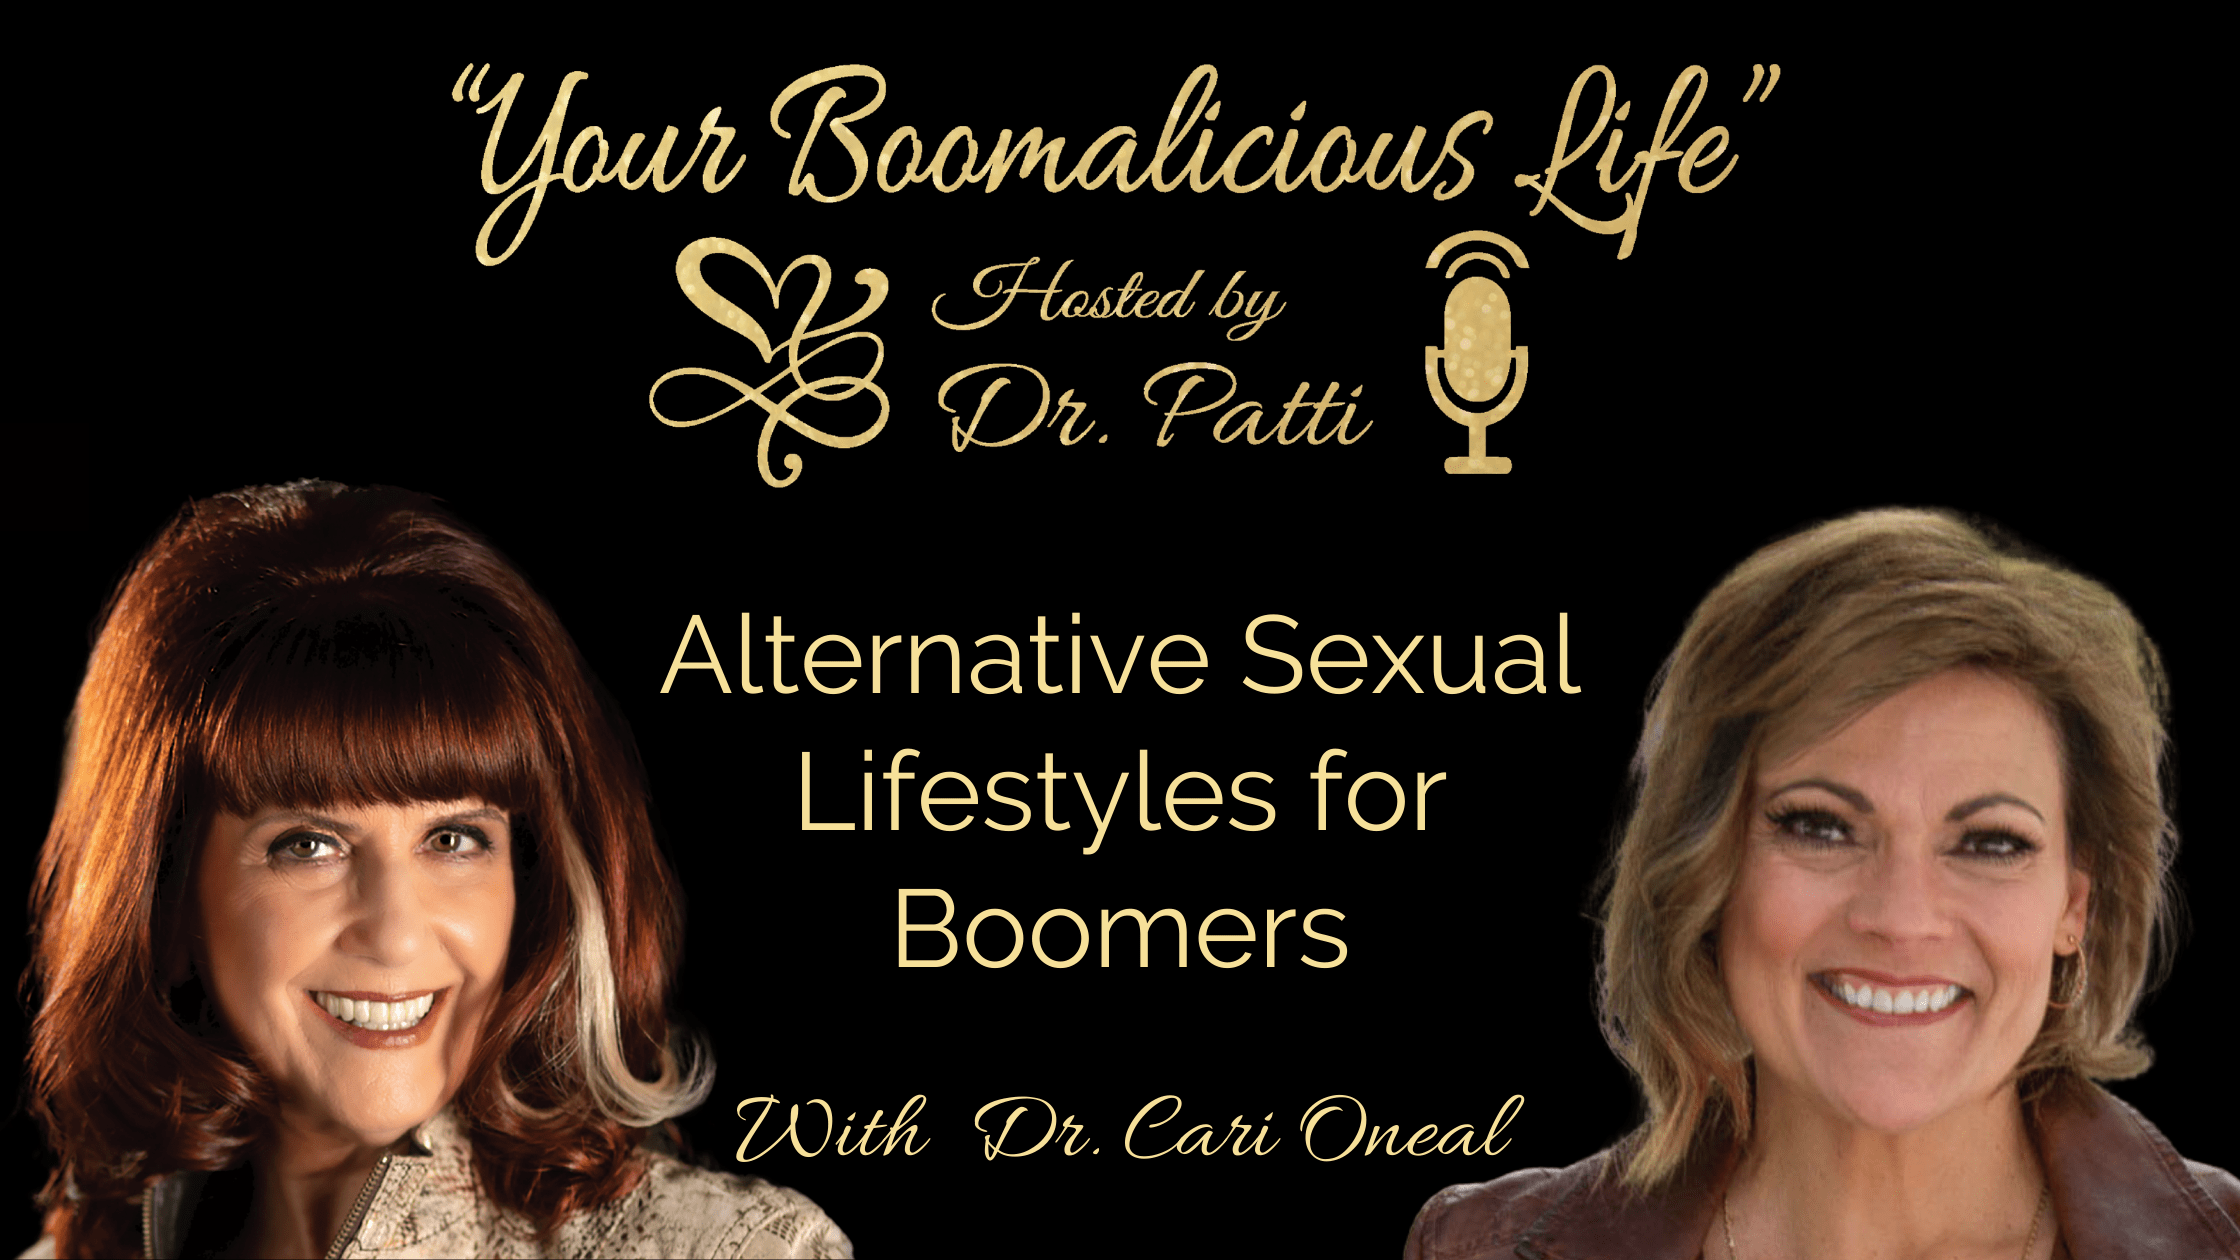 Dr. Patti Britton and Dr. Cari Oneal discuss Alternative Sexual Lifestyles for Boomers